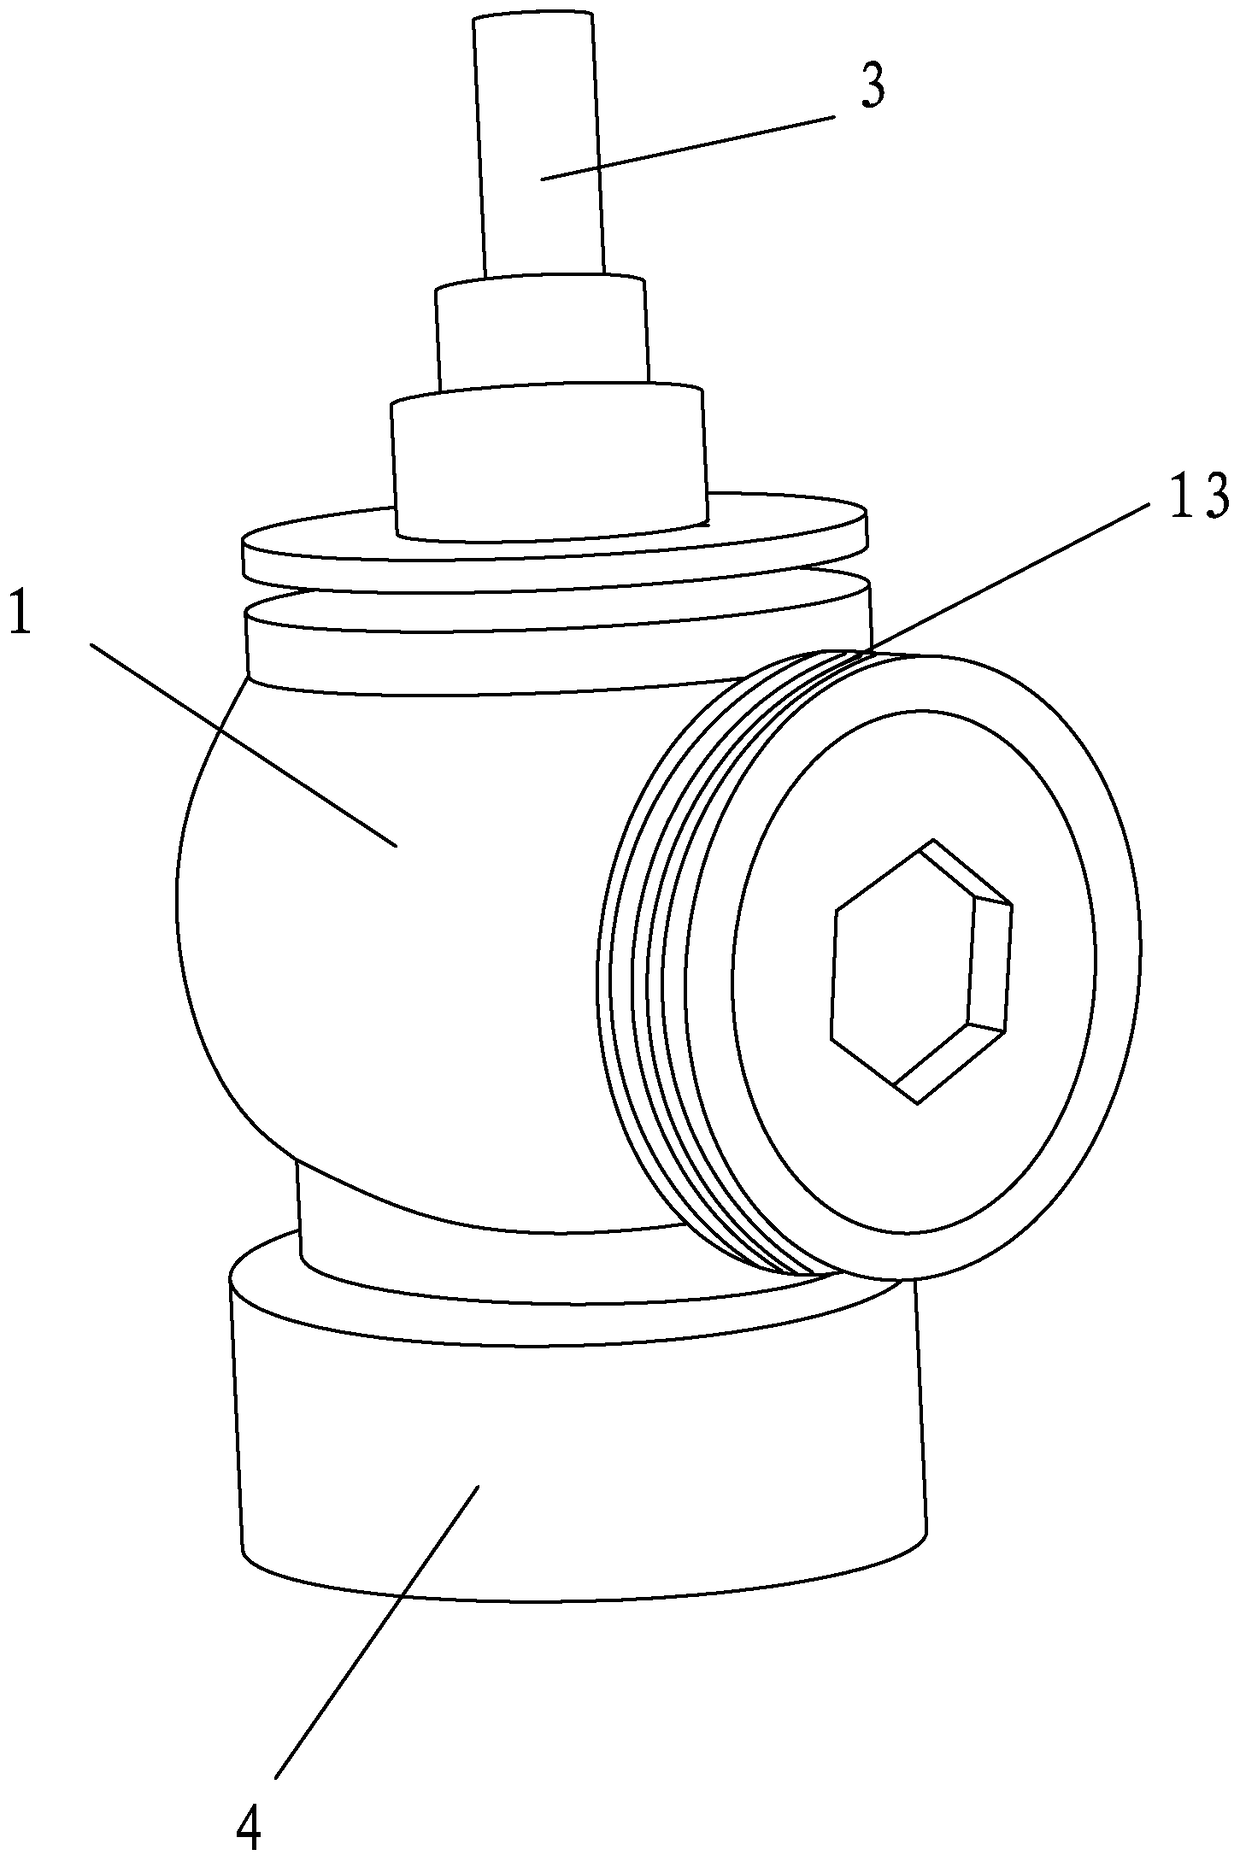 A rotary water supply valve